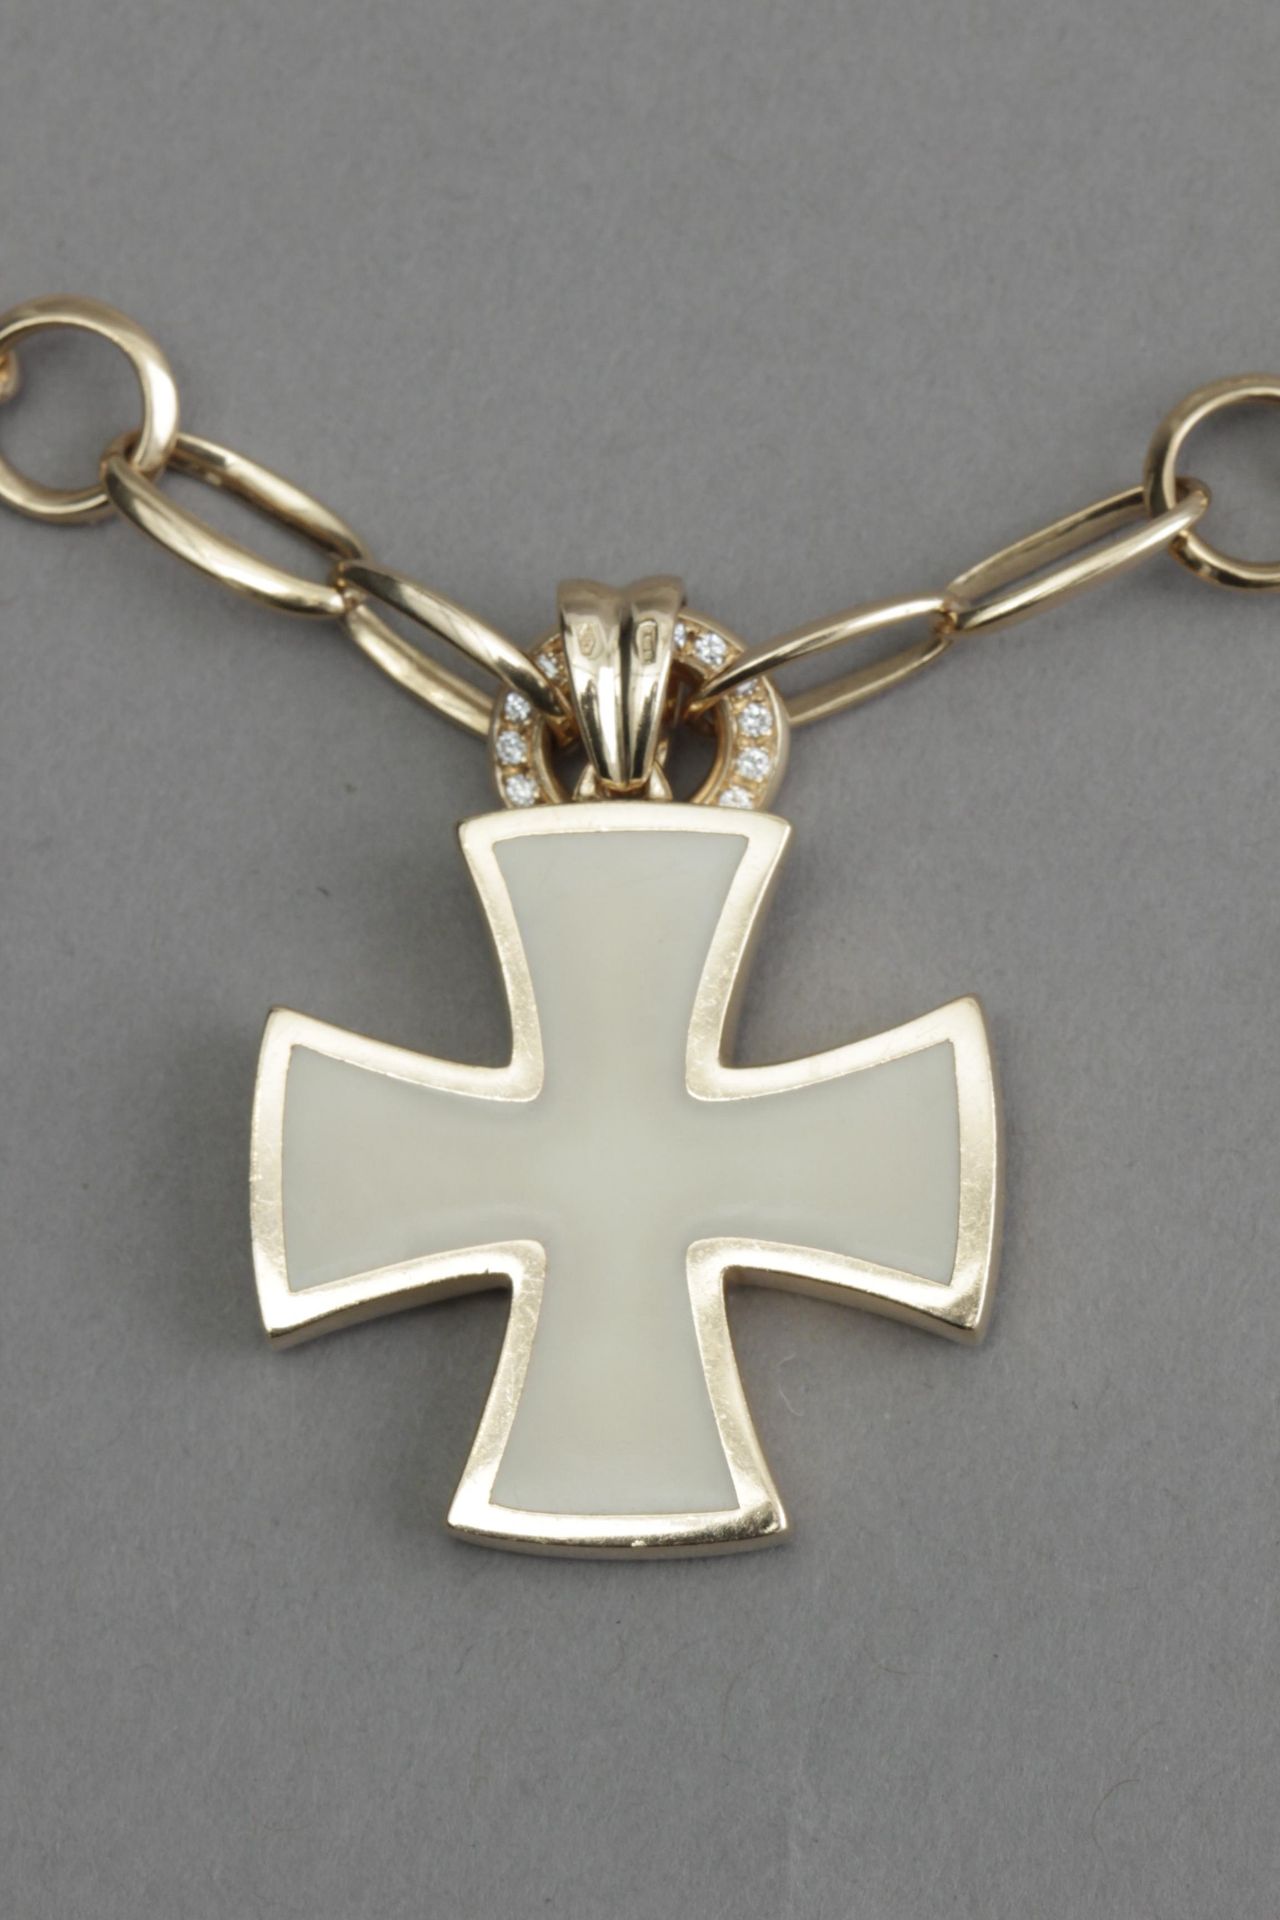 Gavello. Gold enamel and diamond link necklace with a Maltese cross pendant - Image 2 of 3